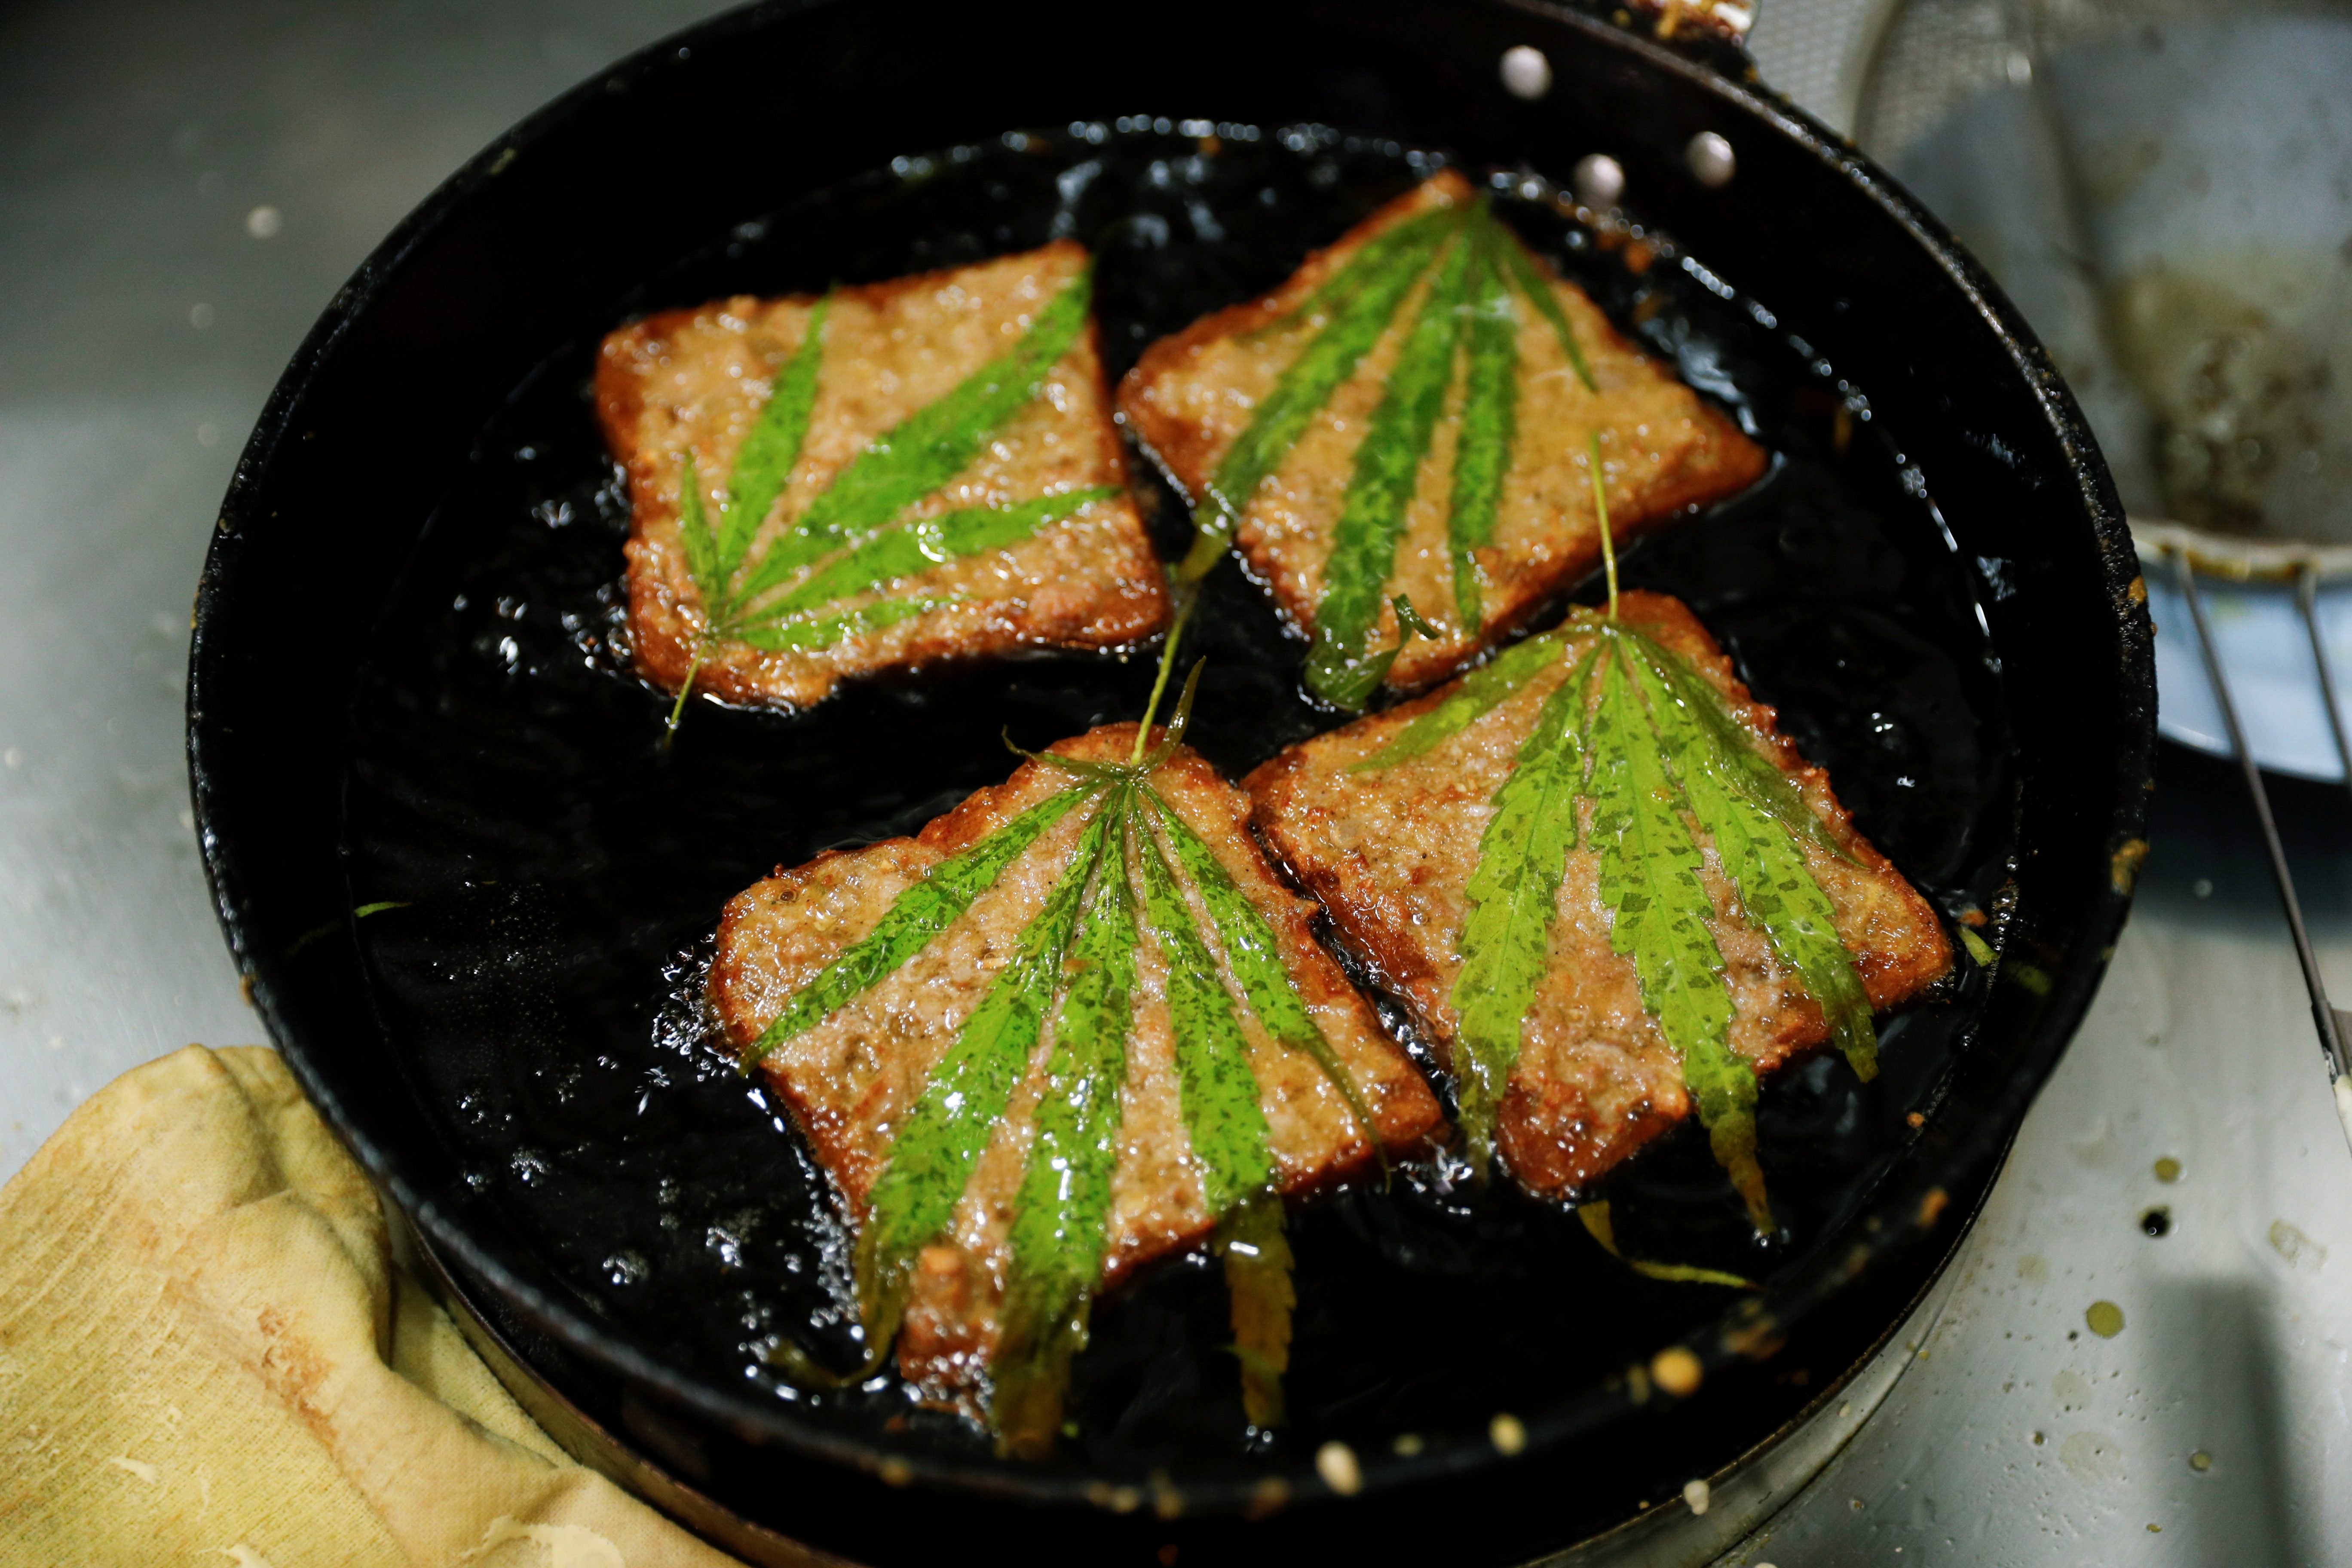 Thailand serves up cannabis cuisine to happy customers